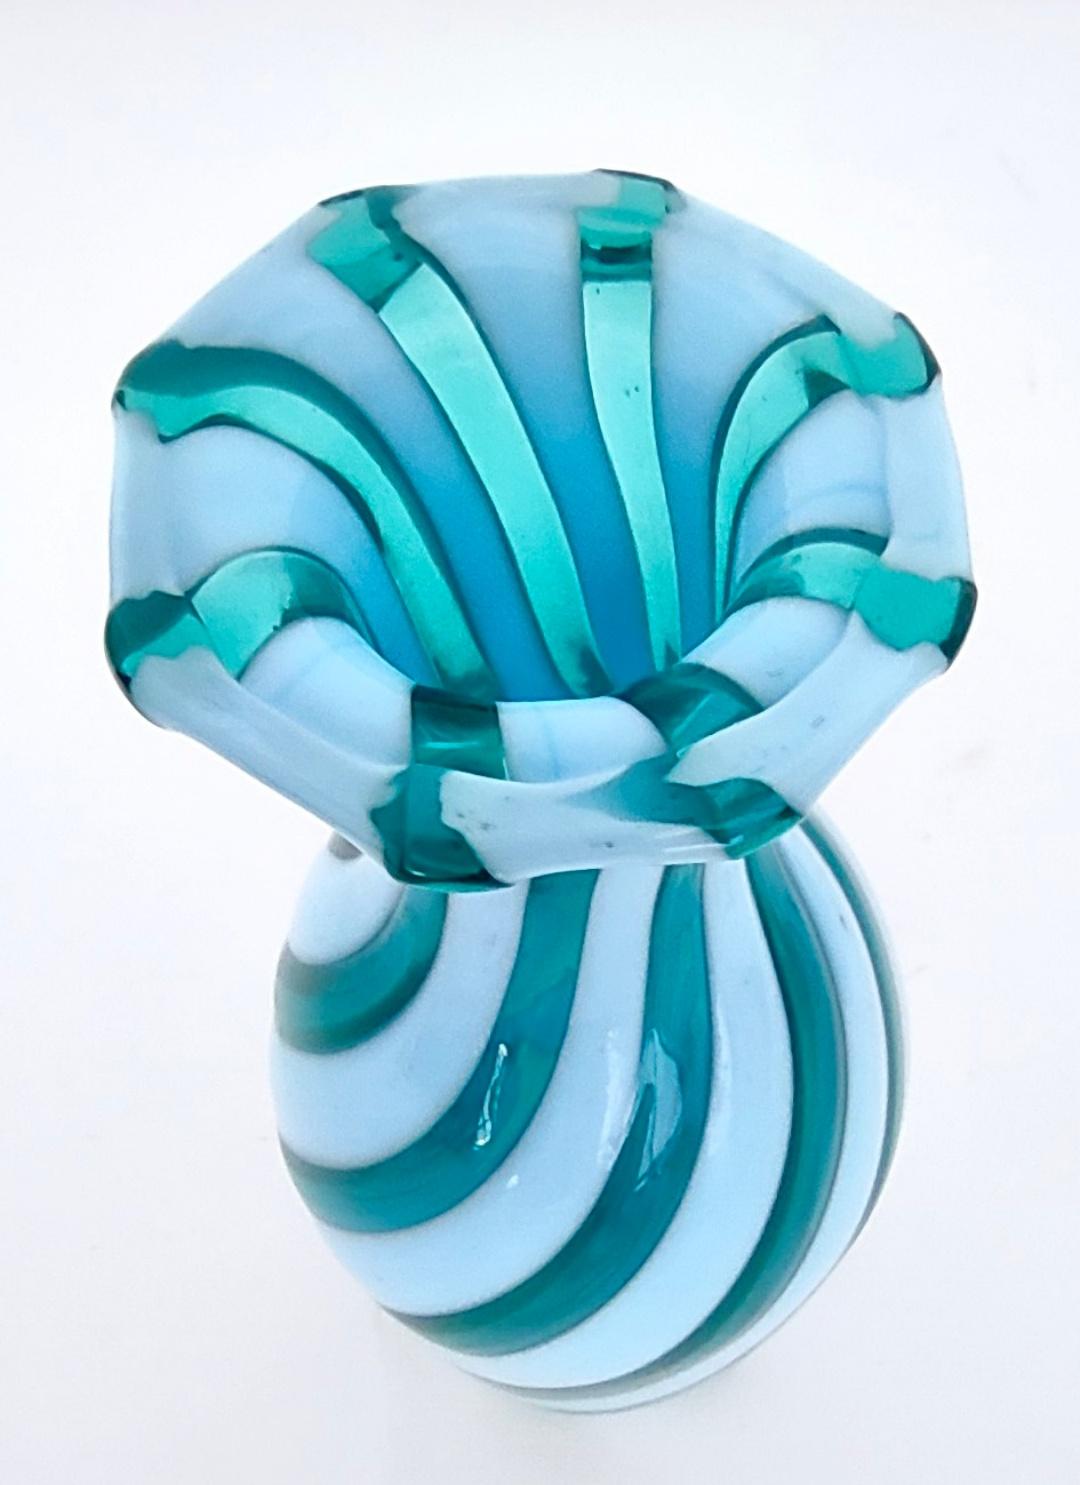 Murano Glass Decanter Ascribable to Toso with Teal and White Canes, Italy 4